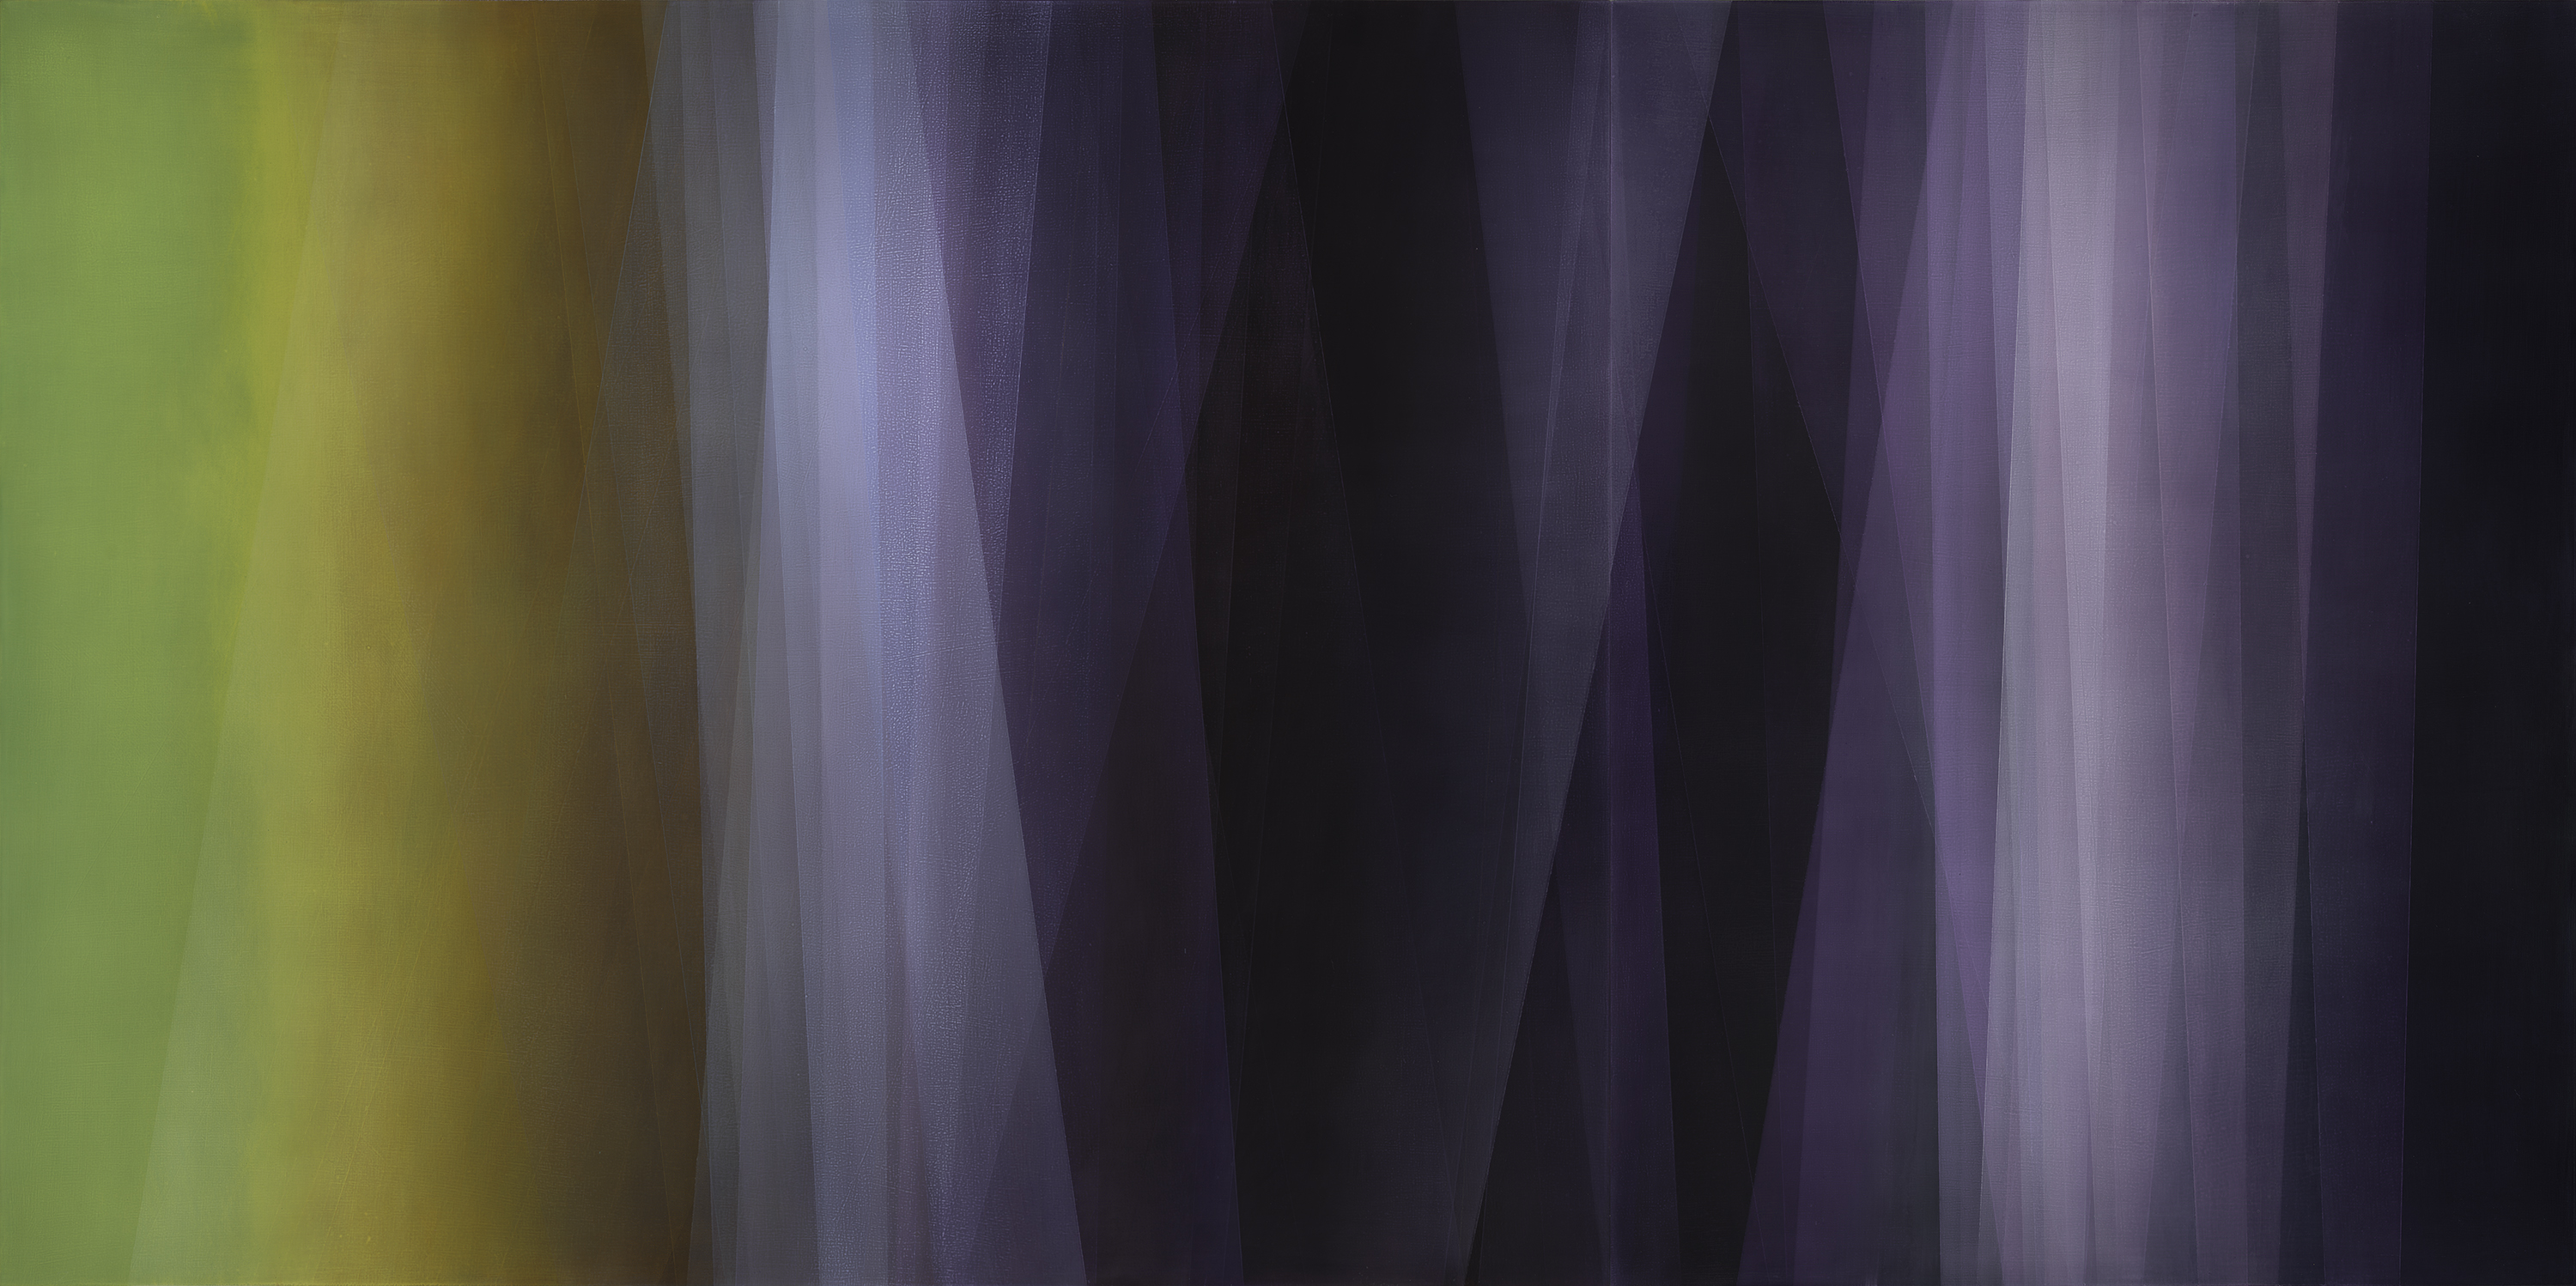 Spaces in Between (Purple/Green), 2020 | Oil on panel | 48 x 96 inches